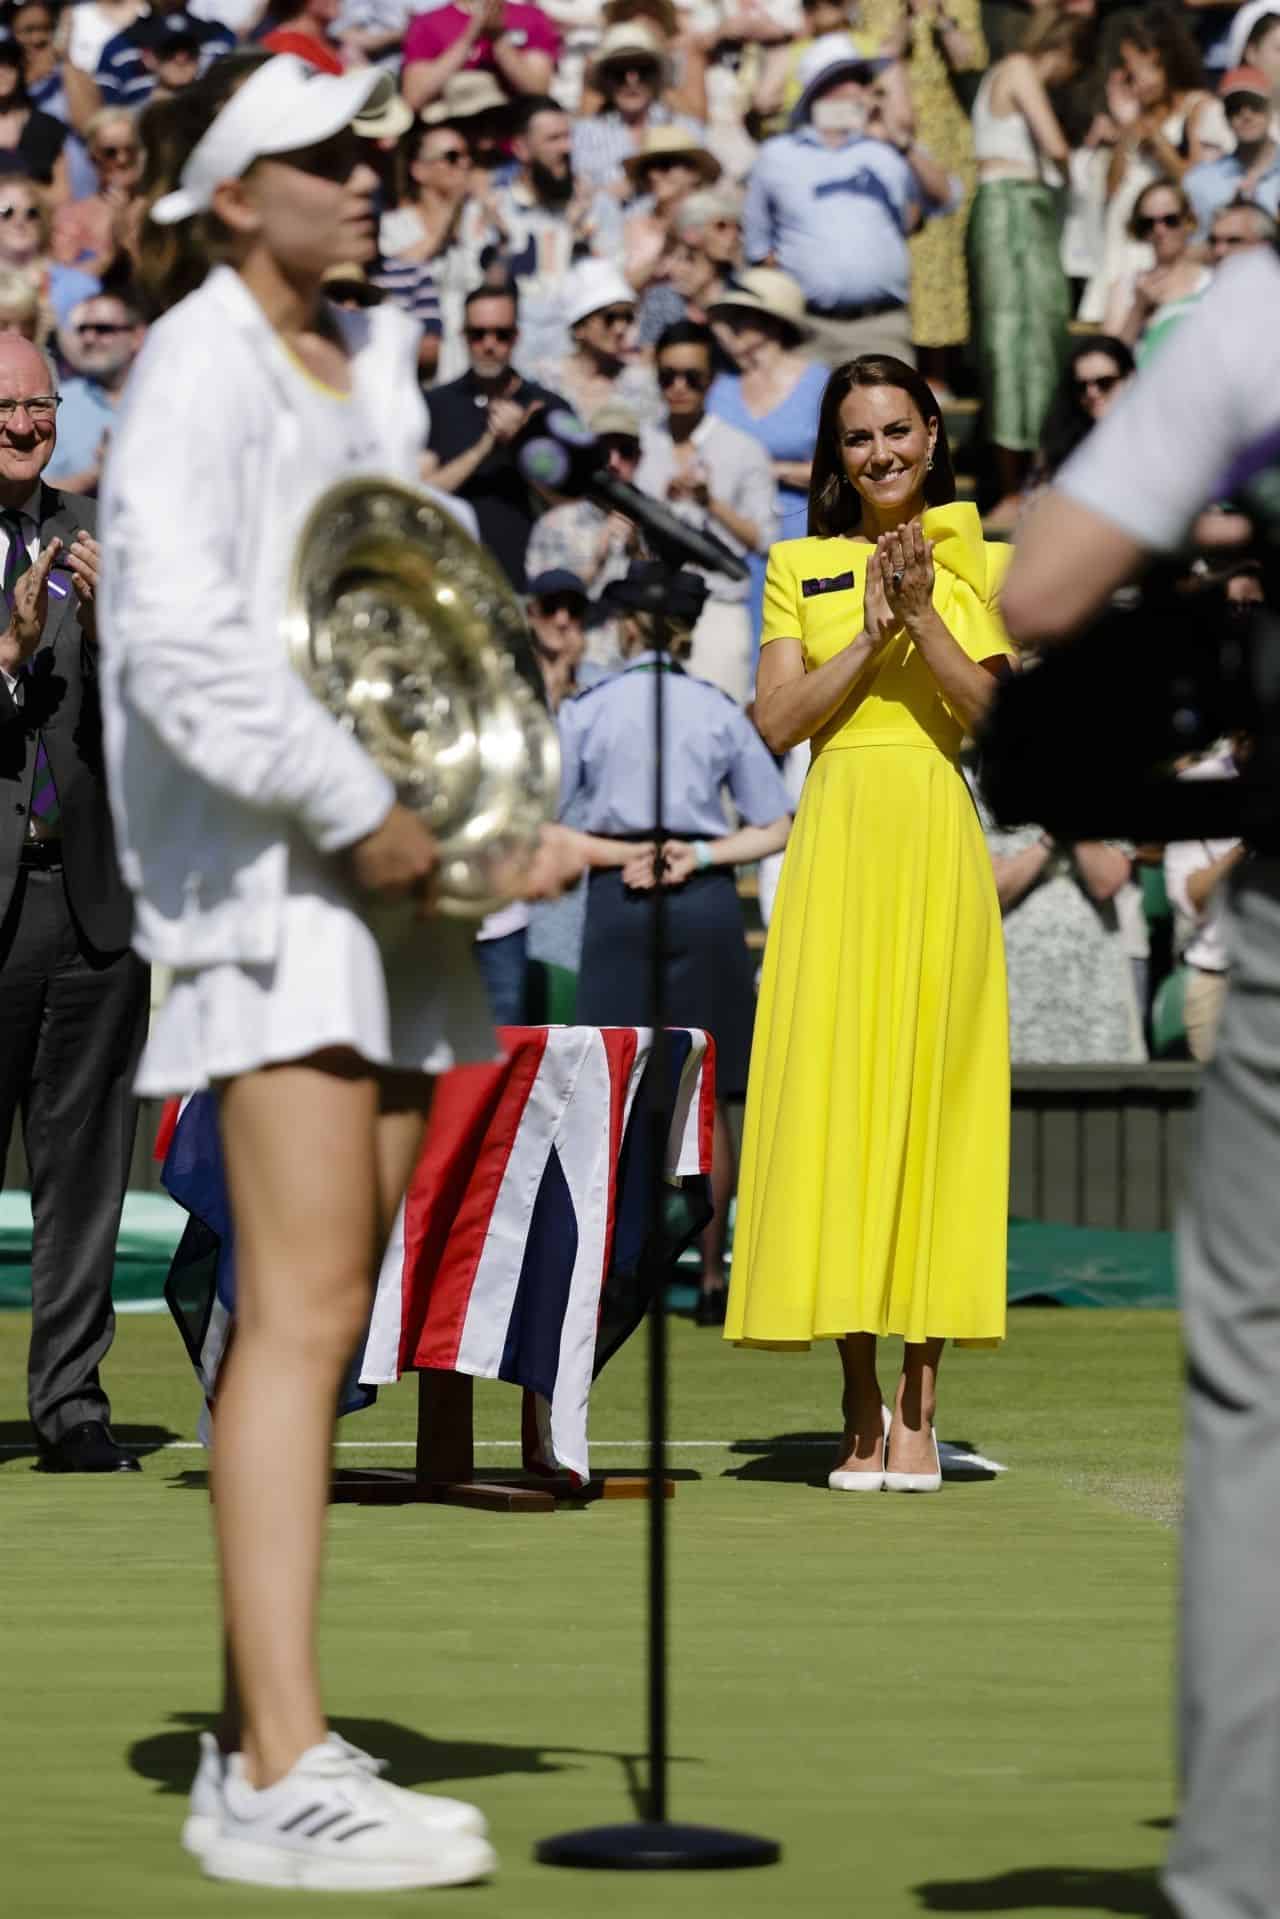 Kate Middleton Looks Amazing in Yellow Dress at the Wimbledon Women's Final